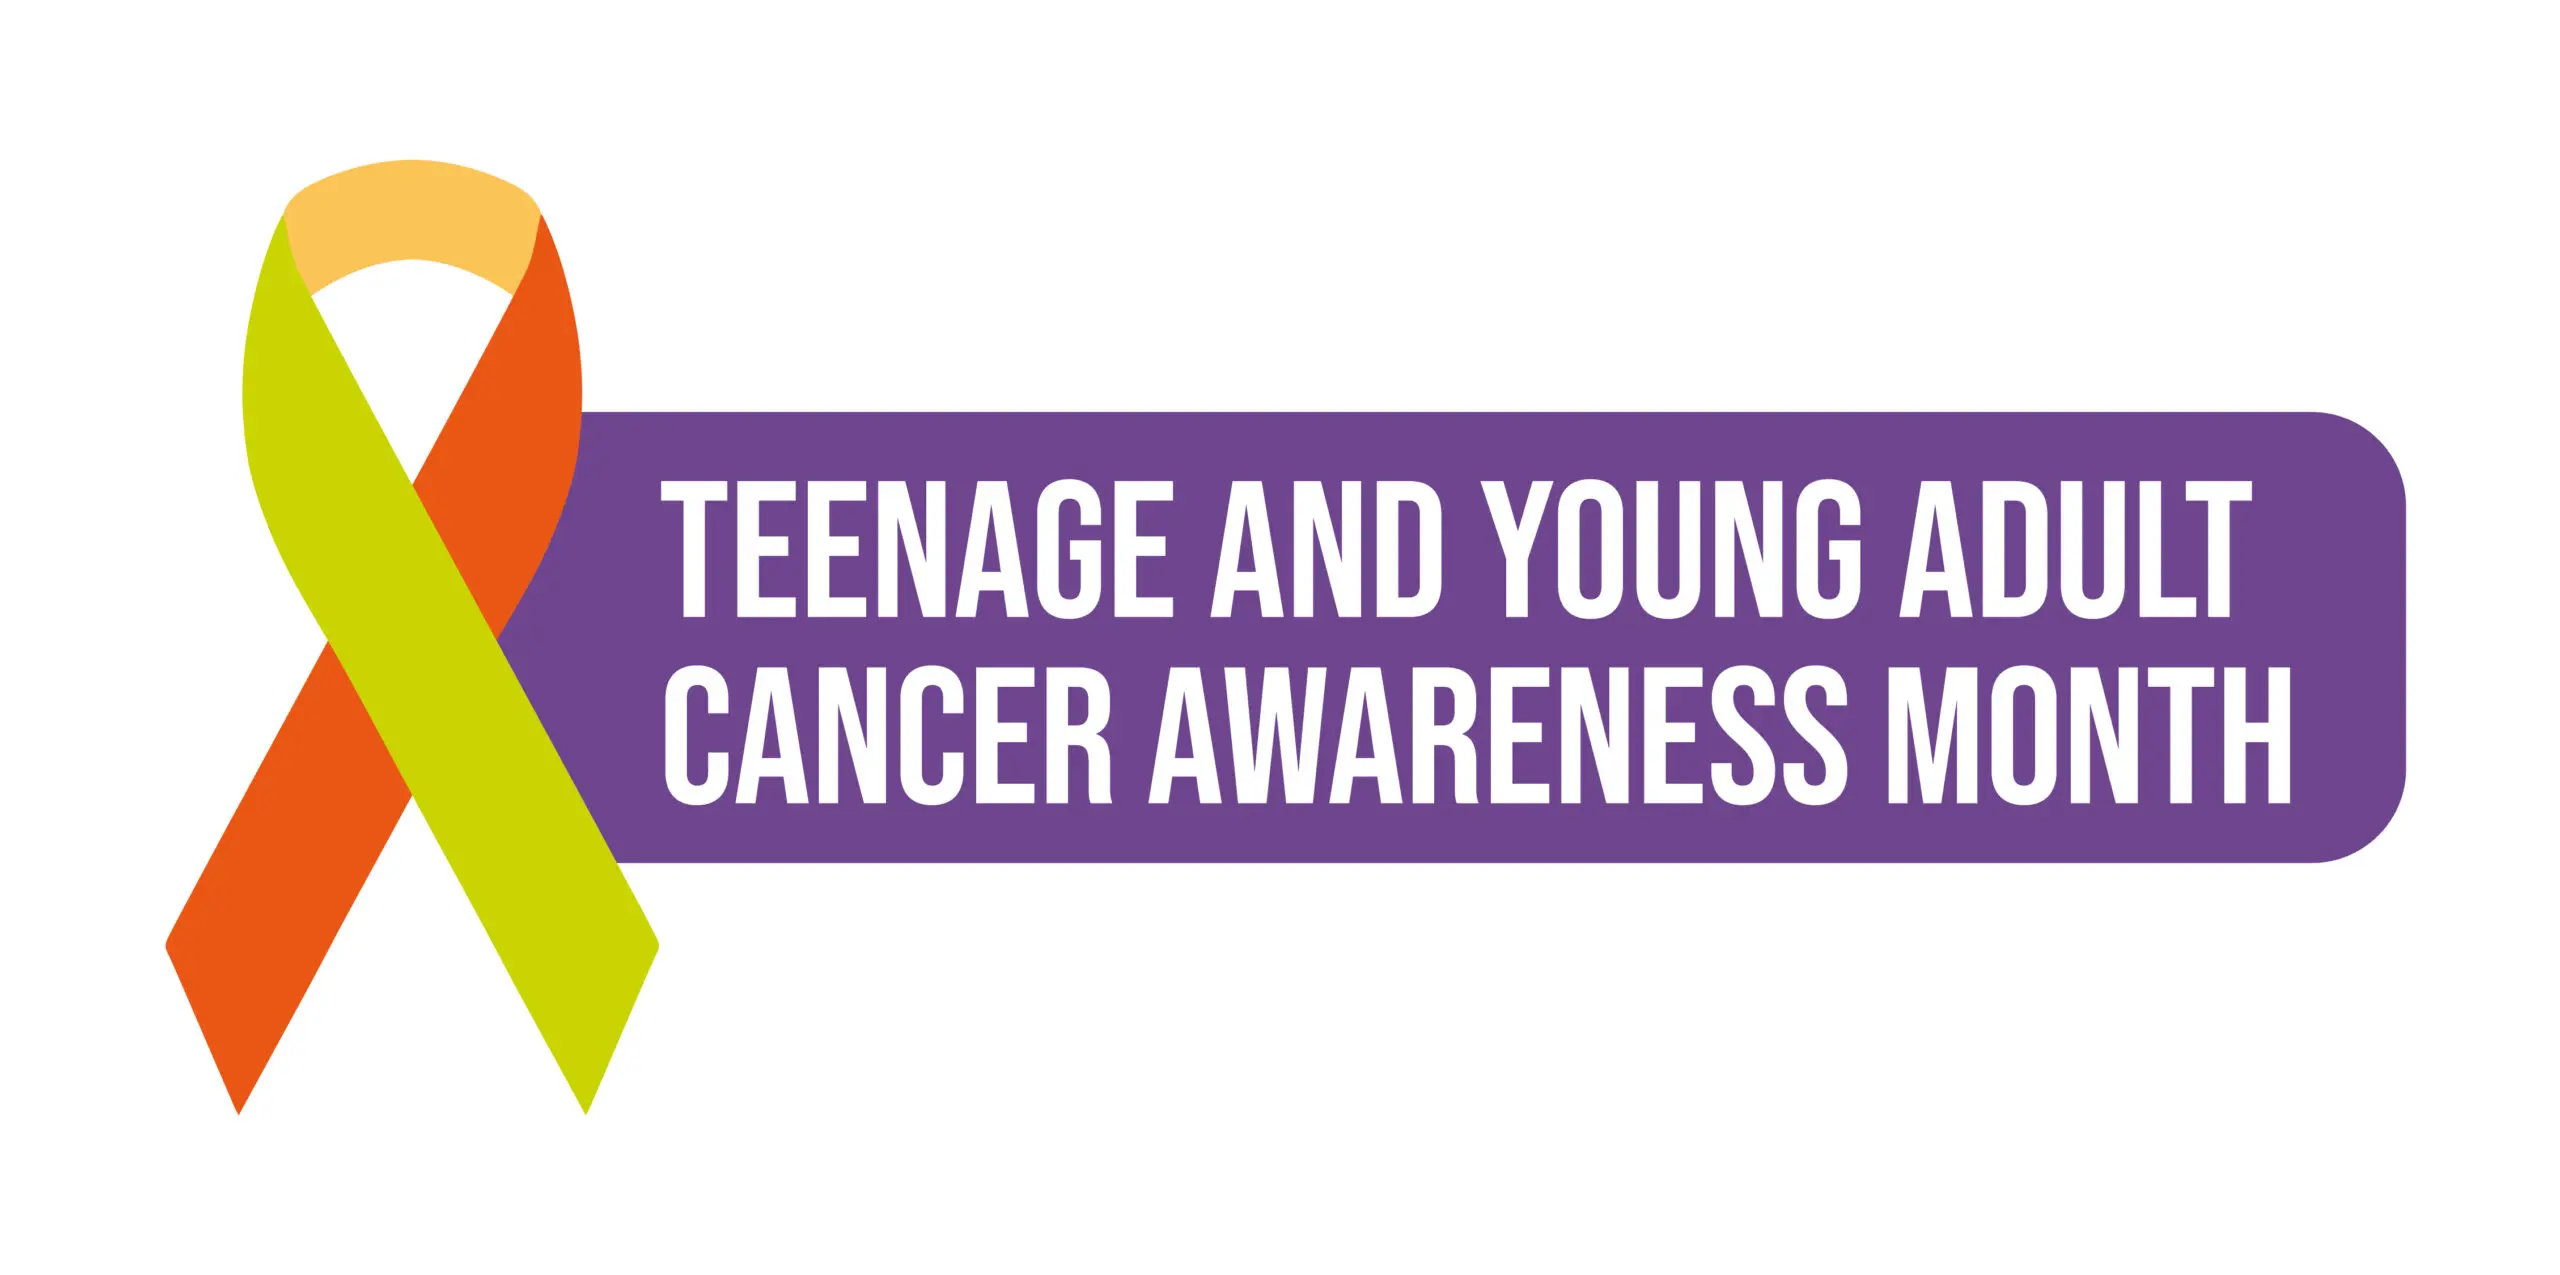 A yellow and orange ribbon is next to the words 'Teenage and Young Adult Cancer Awareness Month' in white with a purple background